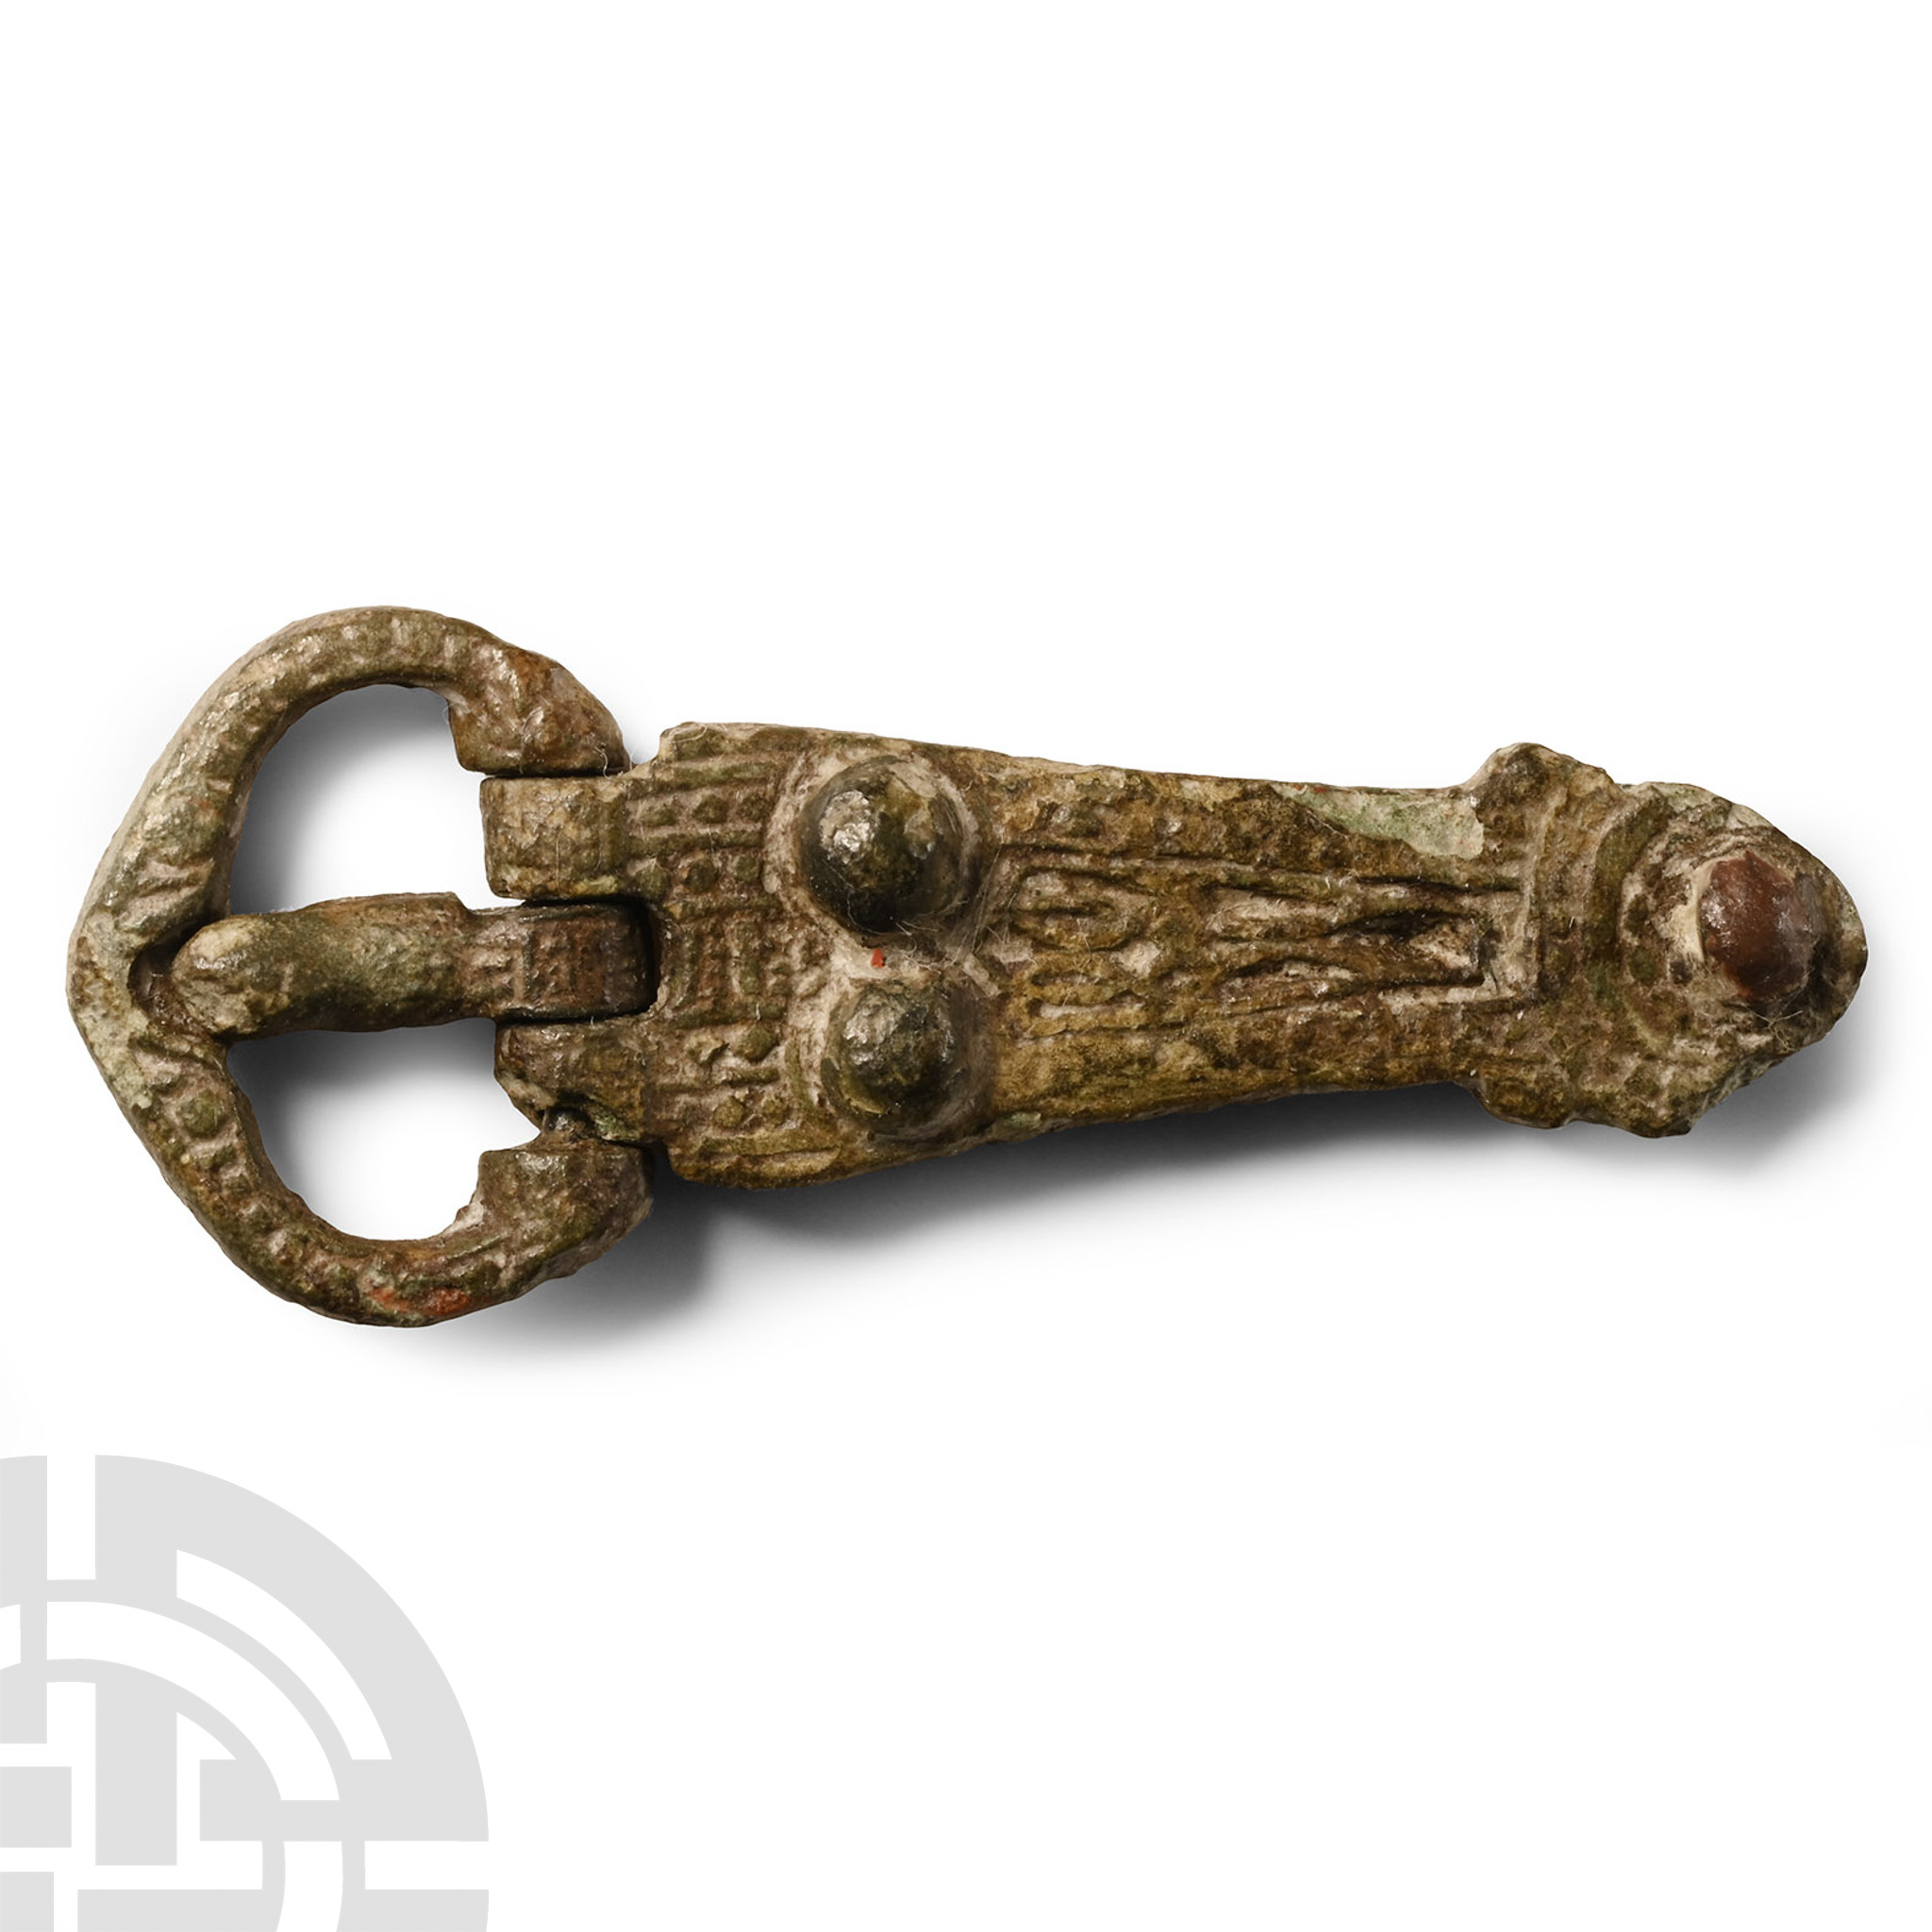 Anglo-Saxon 'East Anglia' Bronze Decorated Buckle and Plate